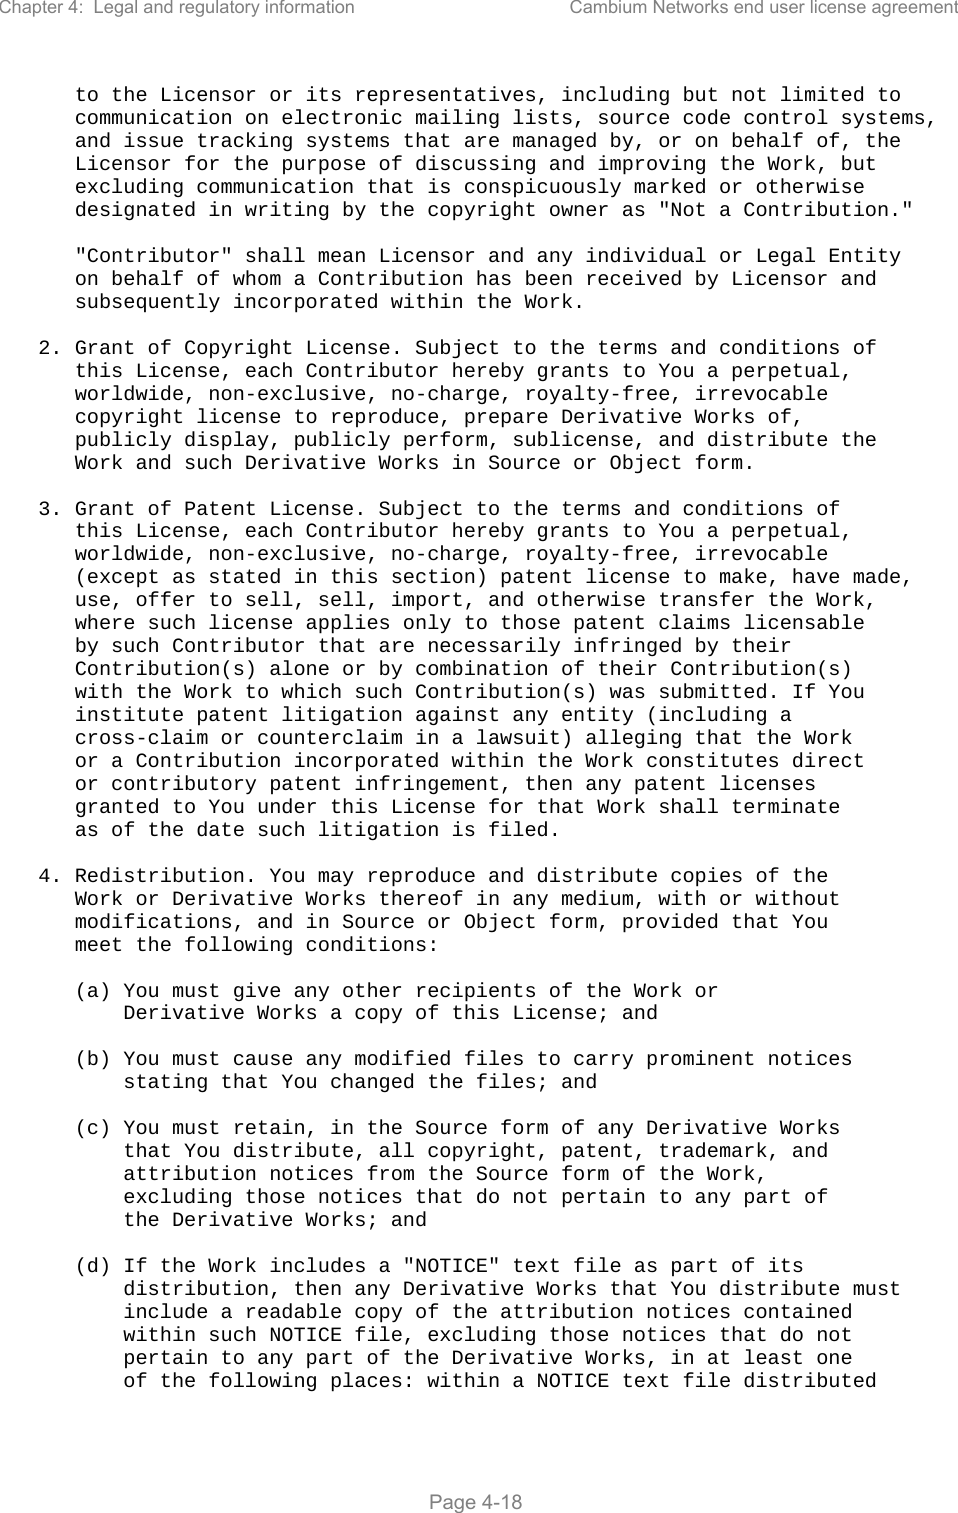 Chapter 4:  Legal and regulatory information  Cambium Networks end user license agreement   Page 4-18       to the Licensor or its representatives, including but not limited to       communication on electronic mailing lists, source code control systems,       and issue tracking systems that are managed by, or on behalf of, the       Licensor for the purpose of discussing and improving the Work, but       excluding communication that is conspicuously marked or otherwise       designated in writing by the copyright owner as &quot;Not a Contribution.&quot;        &quot;Contributor&quot; shall mean Licensor and any individual or Legal Entity       on behalf of whom a Contribution has been received by Licensor and       subsequently incorporated within the Work.     2. Grant of Copyright License. Subject to the terms and conditions of       this License, each Contributor hereby grants to You a perpetual,       worldwide, non-exclusive, no-charge, royalty-free, irrevocable       copyright license to reproduce, prepare Derivative Works of,       publicly display, publicly perform, sublicense, and distribute the       Work and such Derivative Works in Source or Object form.     3. Grant of Patent License. Subject to the terms and conditions of       this License, each Contributor hereby grants to You a perpetual,       worldwide, non-exclusive, no-charge, royalty-free, irrevocable       (except as stated in this section) patent license to make, have made,       use, offer to sell, sell, import, and otherwise transfer the Work,       where such license applies only to those patent claims licensable       by such Contributor that are necessarily infringed by their       Contribution(s) alone or by combination of their Contribution(s)       with the Work to which such Contribution(s) was submitted. If You       institute patent litigation against any entity (including a       cross-claim or counterclaim in a lawsuit) alleging that the Work       or a Contribution incorporated within the Work constitutes direct       or contributory patent infringement, then any patent licenses       granted to You under this License for that Work shall terminate       as of the date such litigation is filed.     4. Redistribution. You may reproduce and distribute copies of the       Work or Derivative Works thereof in any medium, with or without       modifications, and in Source or Object form, provided that You       meet the following conditions:        (a) You must give any other recipients of the Work or           Derivative Works a copy of this License; and        (b) You must cause any modified files to carry prominent notices           stating that You changed the files; and        (c) You must retain, in the Source form of any Derivative Works           that You distribute, all copyright, patent, trademark, and           attribution notices from the Source form of the Work,           excluding those notices that do not pertain to any part of           the Derivative Works; and        (d) If the Work includes a &quot;NOTICE&quot; text file as part of its           distribution, then any Derivative Works that You distribute must           include a readable copy of the attribution notices contained           within such NOTICE file, excluding those notices that do not           pertain to any part of the Derivative Works, in at least one           of the following places: within a NOTICE text file distributed 